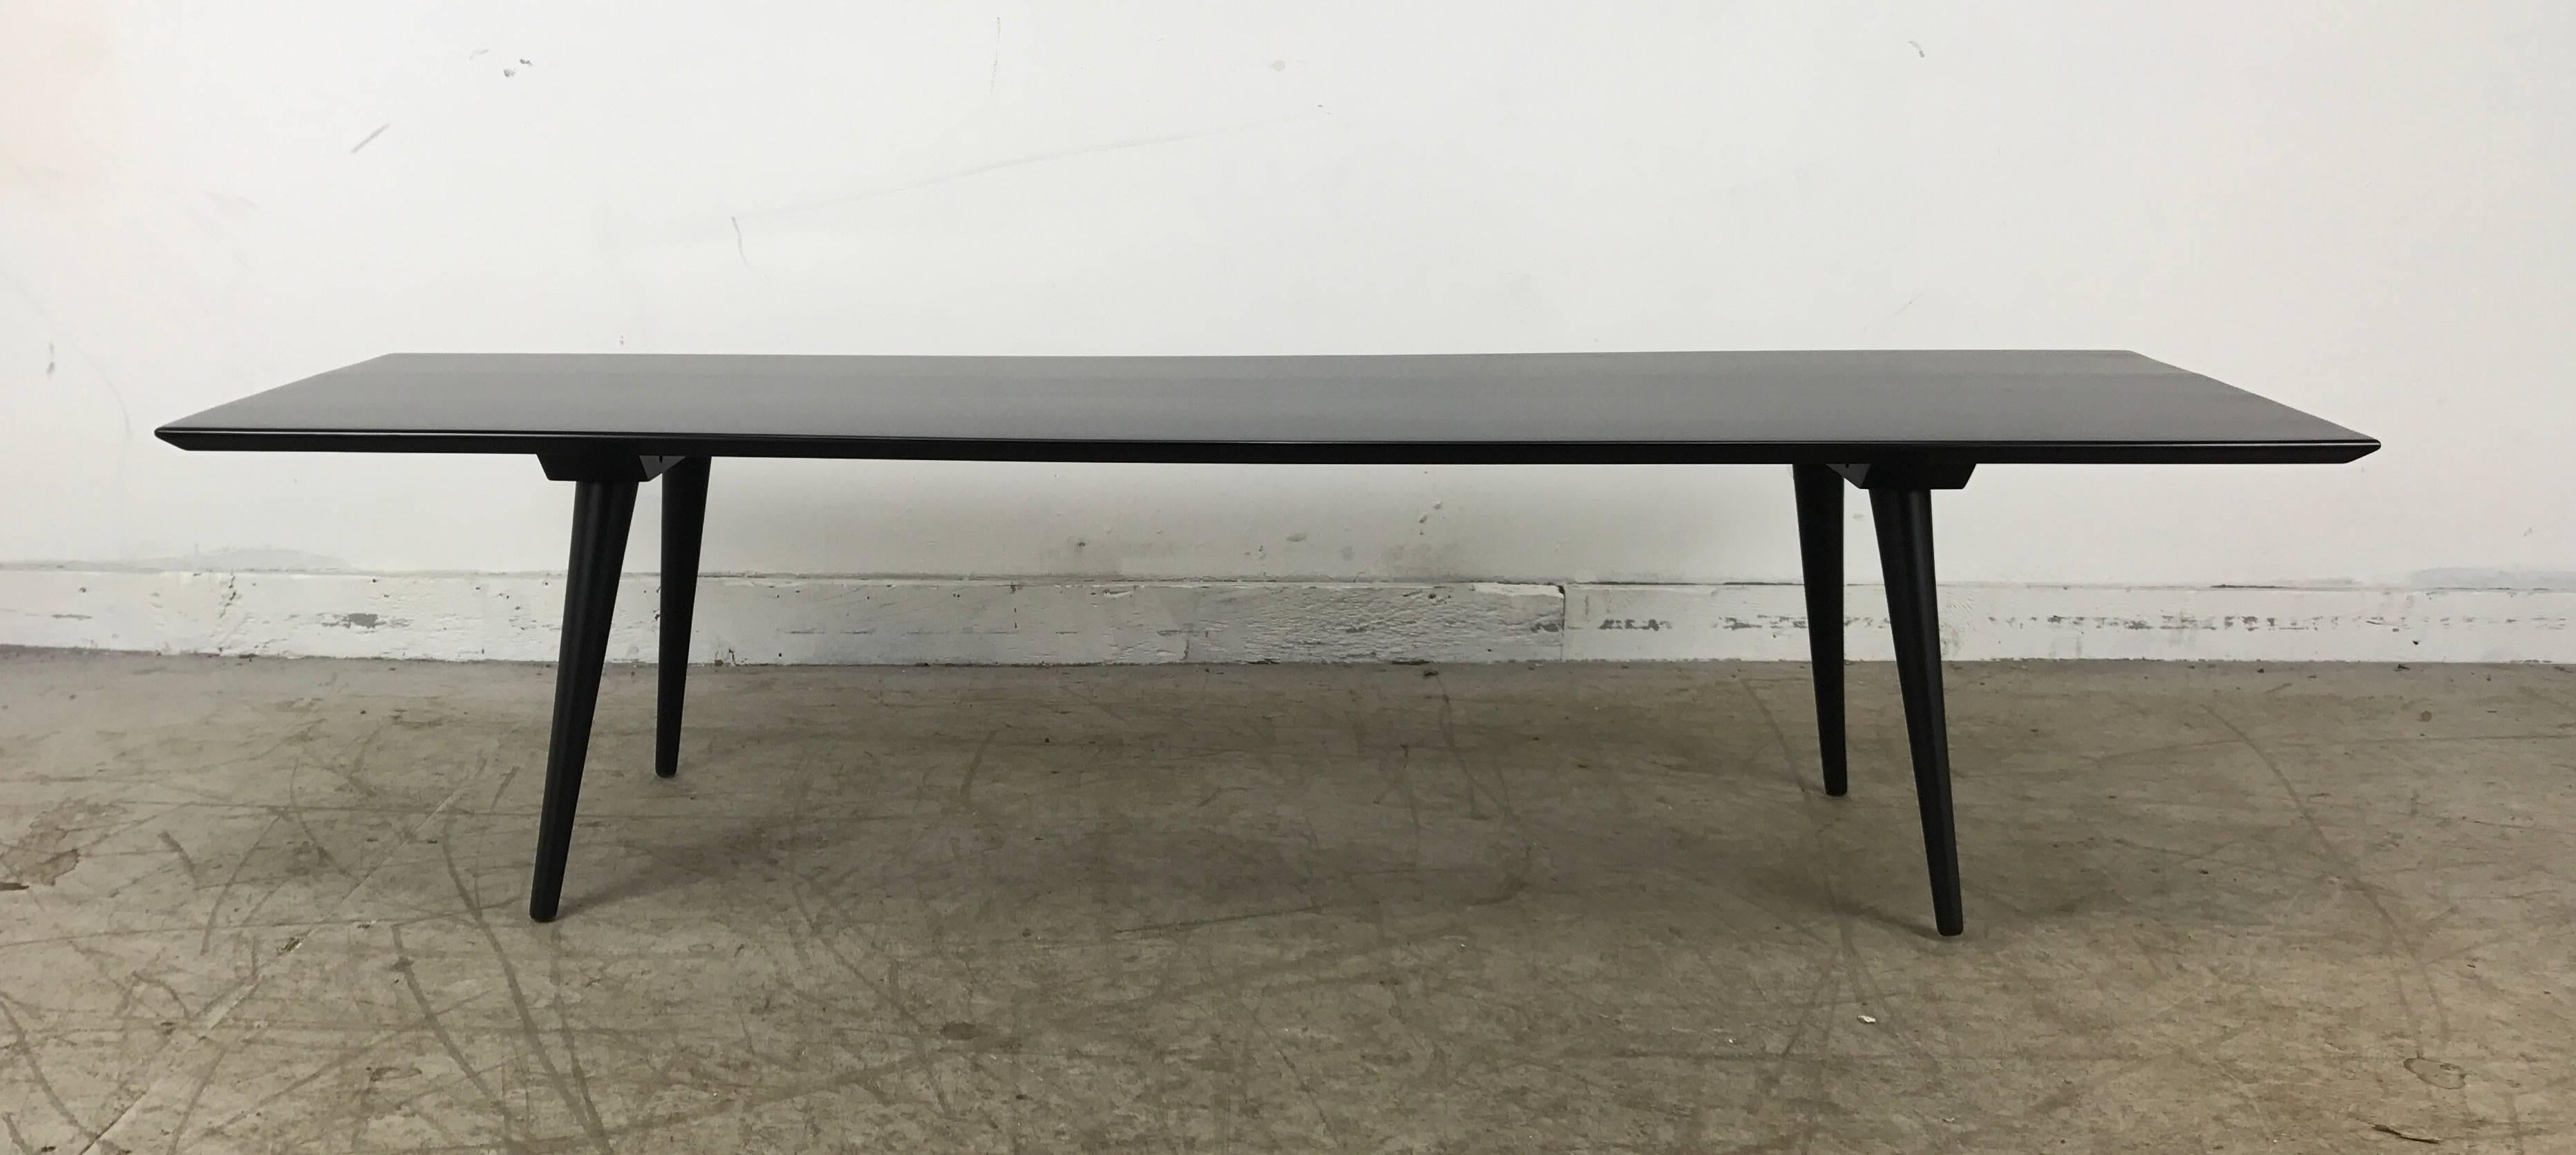 Classic Mid-Century Modern 'Planner group cocktail or coffee table designed by Paul McCobb, recently restored, stunning black lacquer finish. Also avail matching side tables, please see other listing.